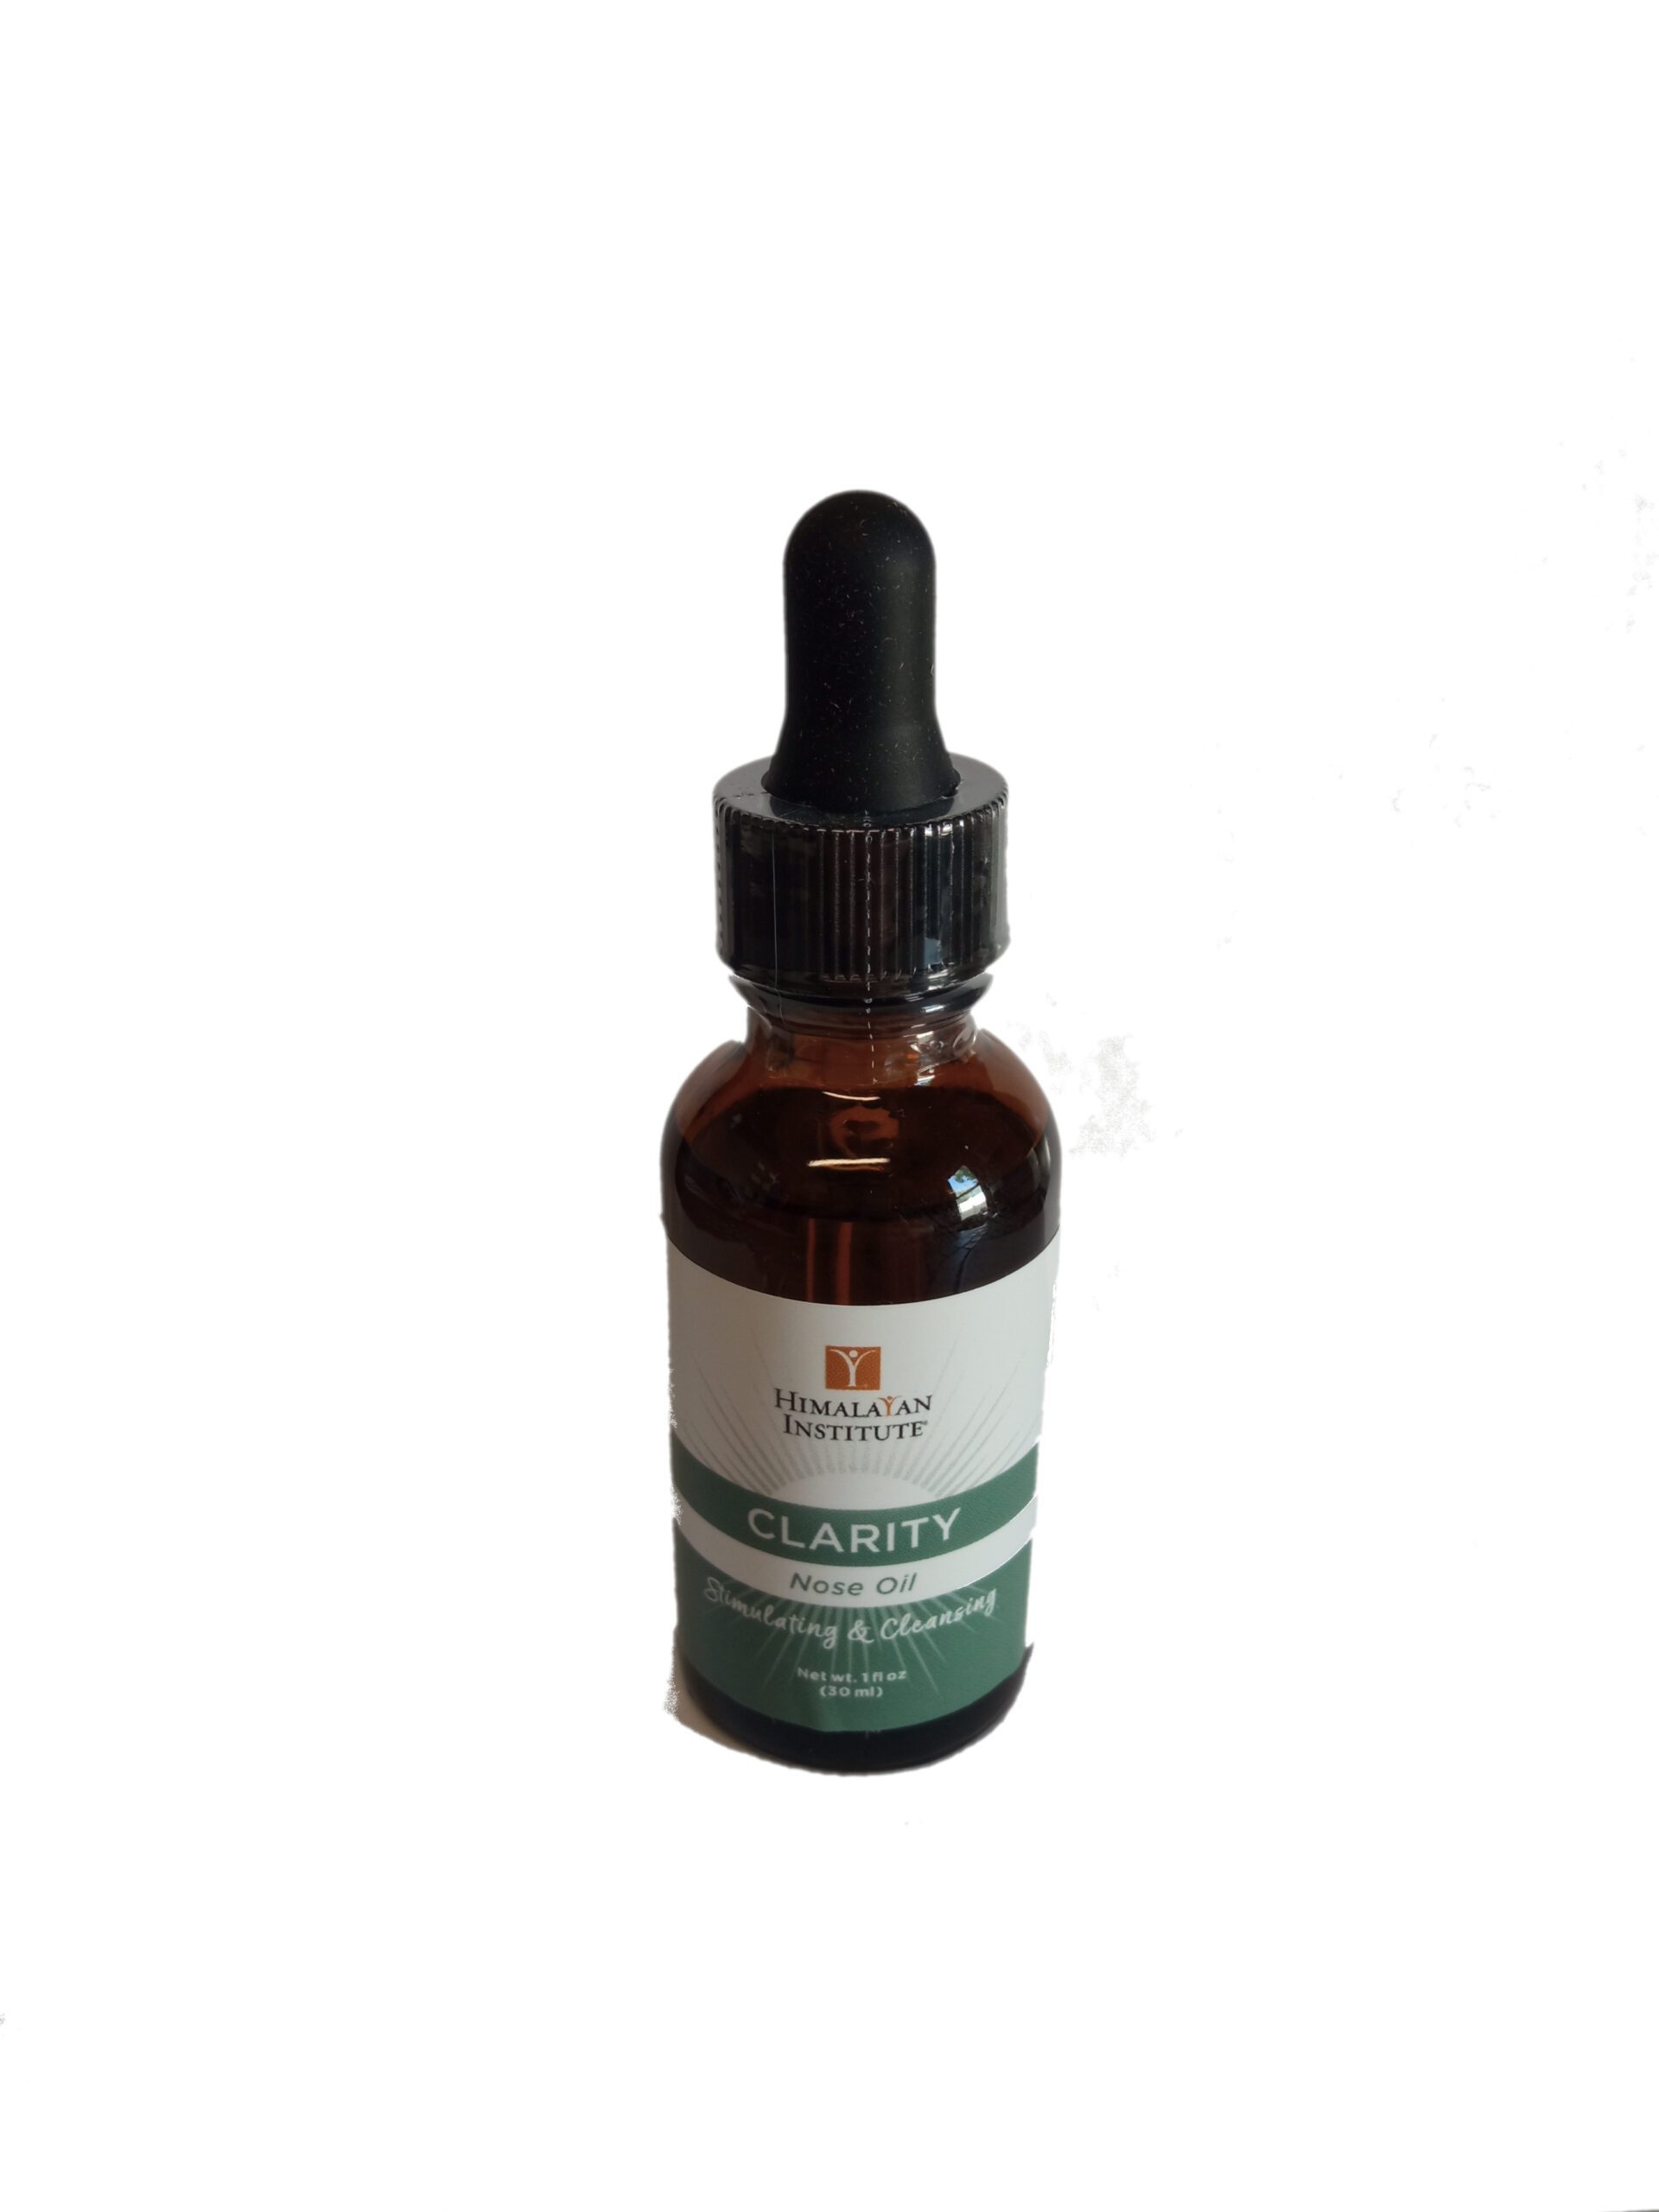 A bottle of Clarity Nose Oil from Himalayan Institute